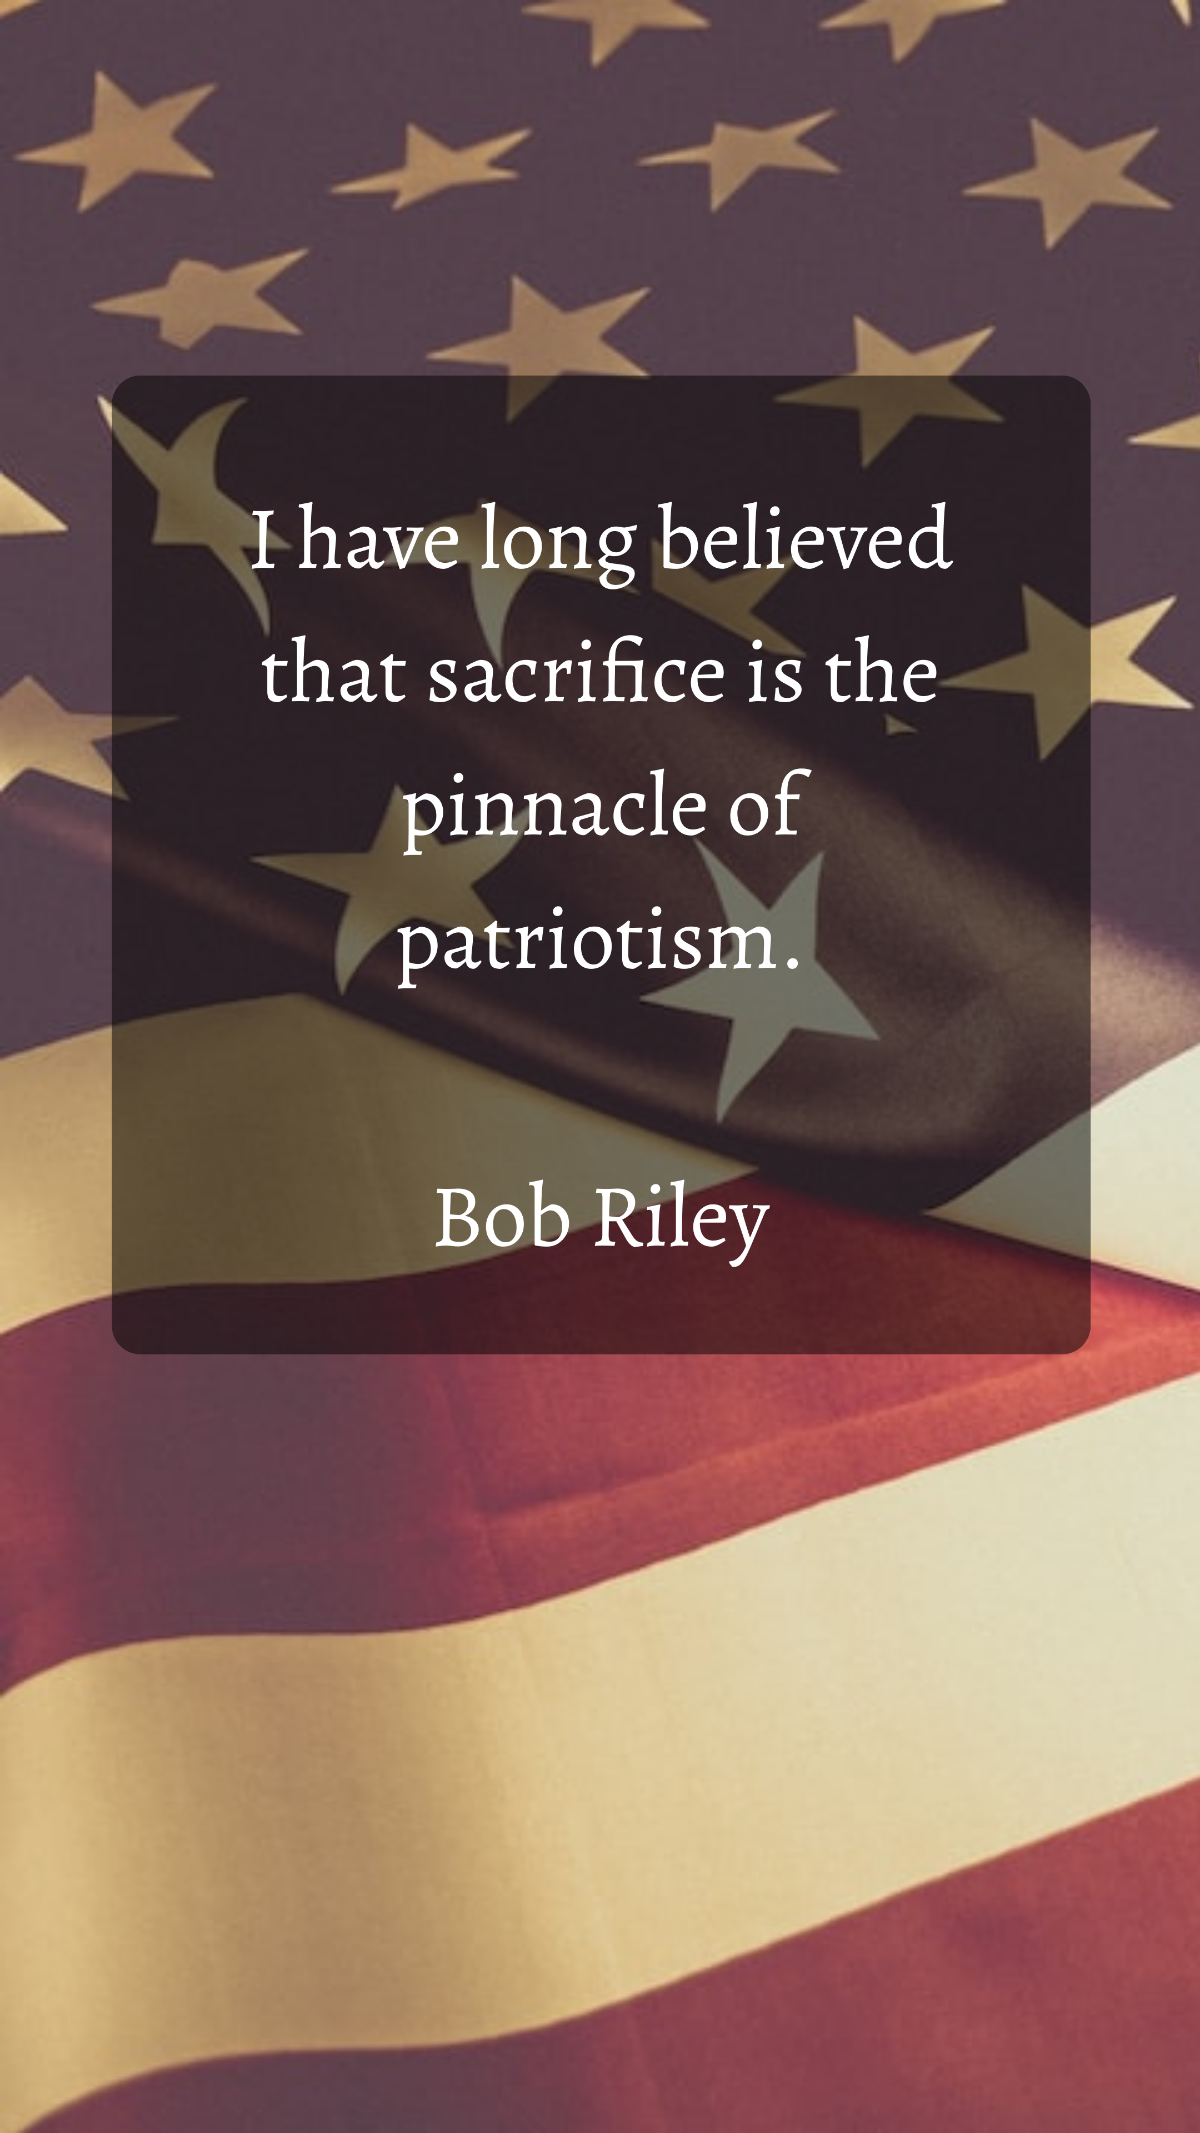 Bob Riley - I have long believed that sacrifice is the pinnacle of patriotism. Template